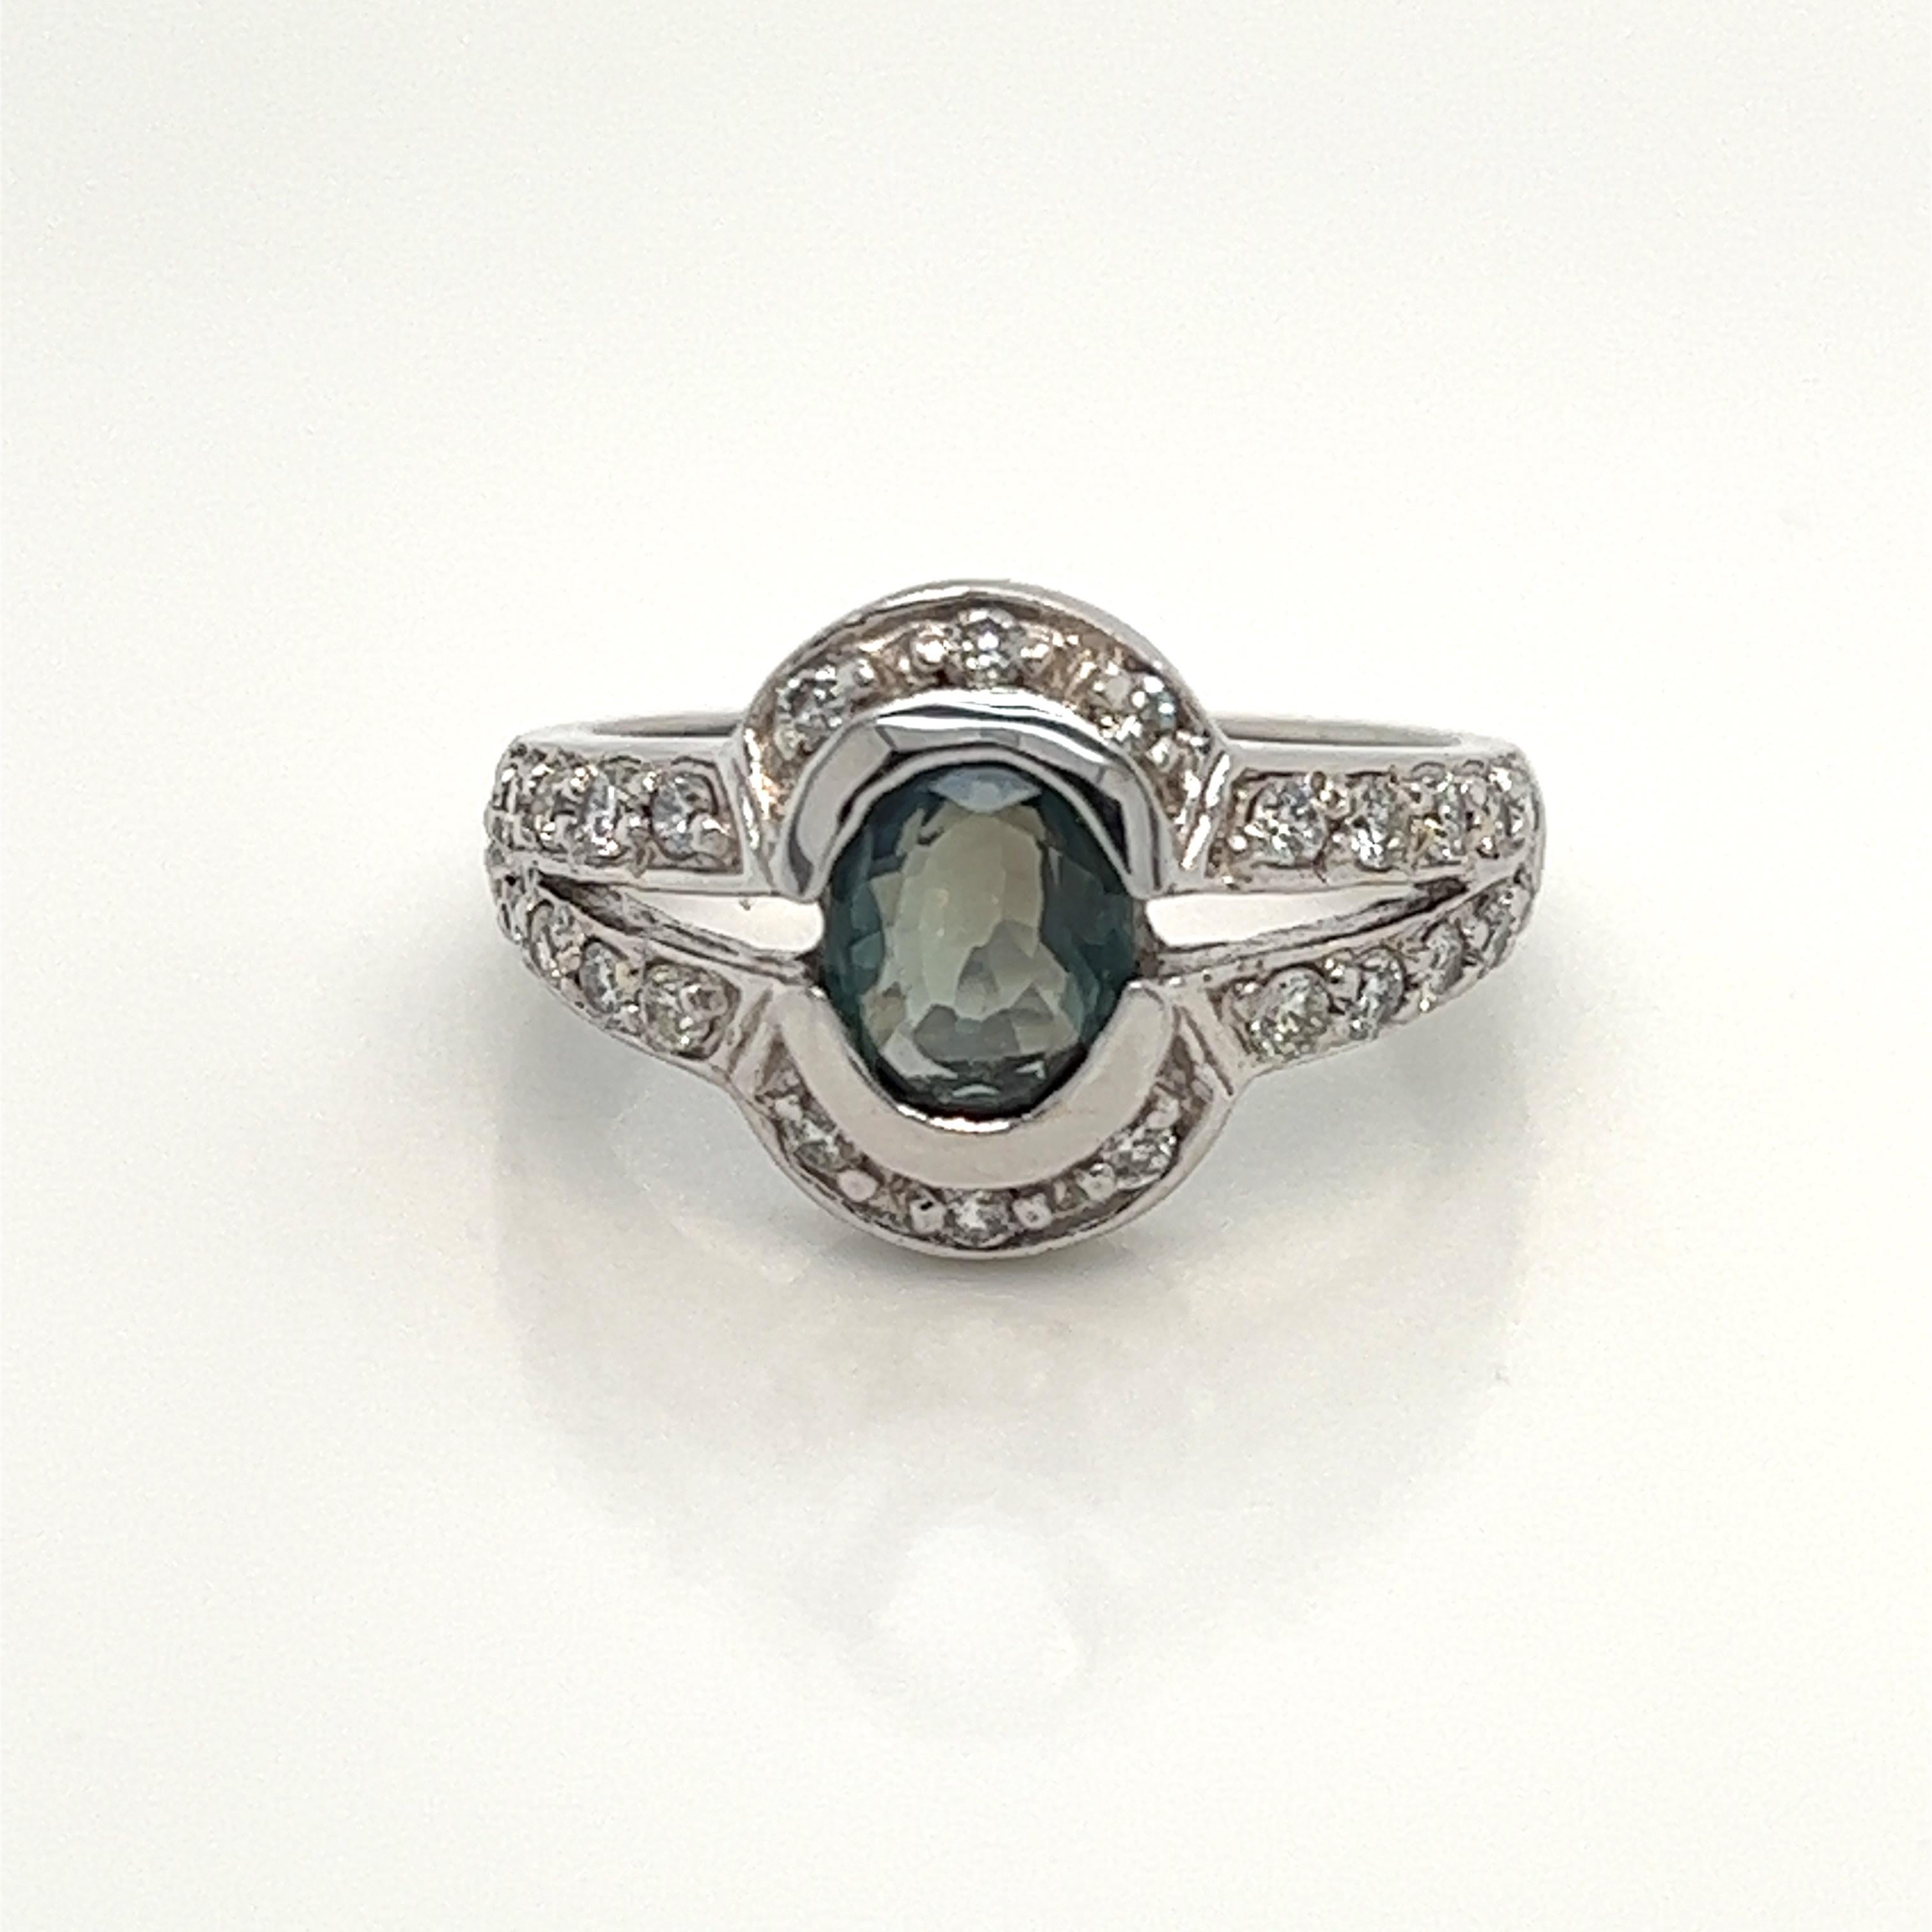 This is a gorgeous natural AAA quality Oval Alexandrite surrounded by dainty diamonds that is set in solid 18K white gold. This ring features a natural 1.23 carat Oval alexandrite that is certified by the Gemological Institute of America (GIA). The